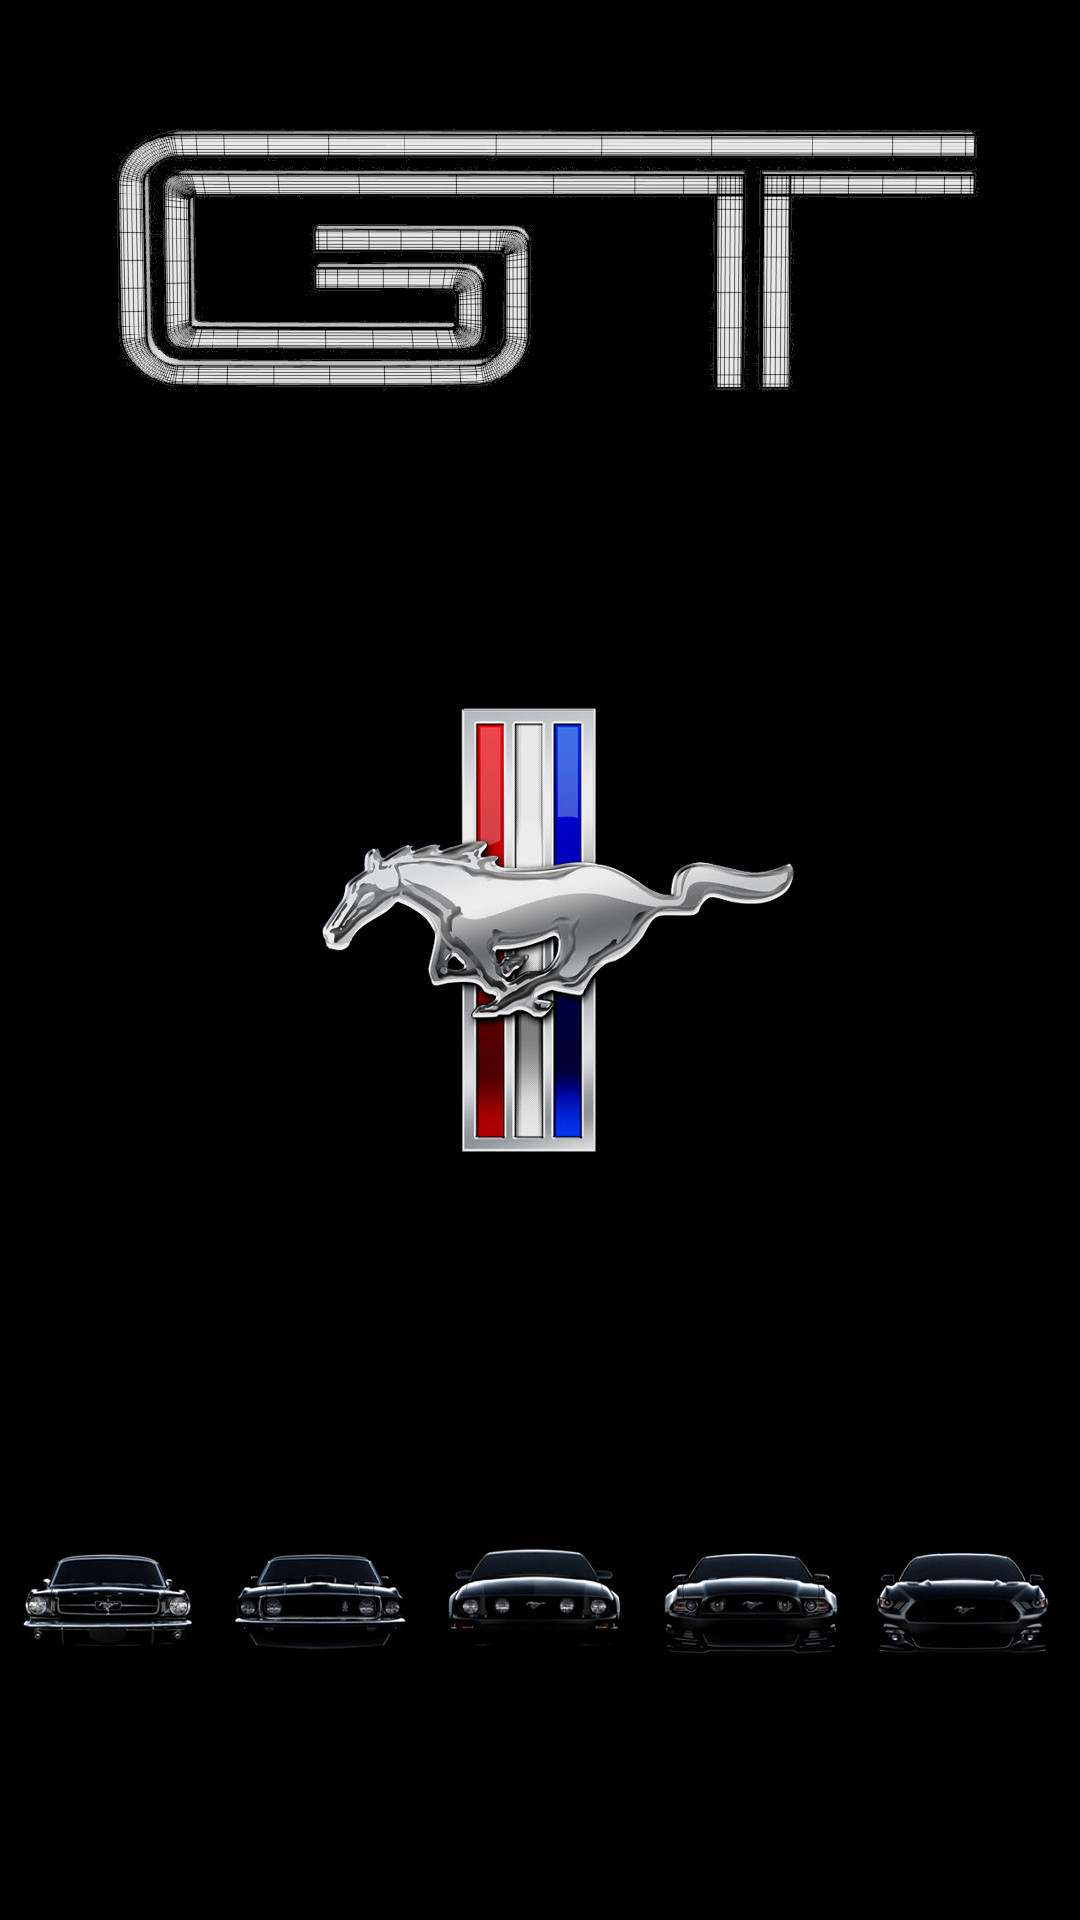 1080x1920 You know what here you go-the same but with a centered mustang logo :) (I  put it down so it didn't hit my lock screen clock)